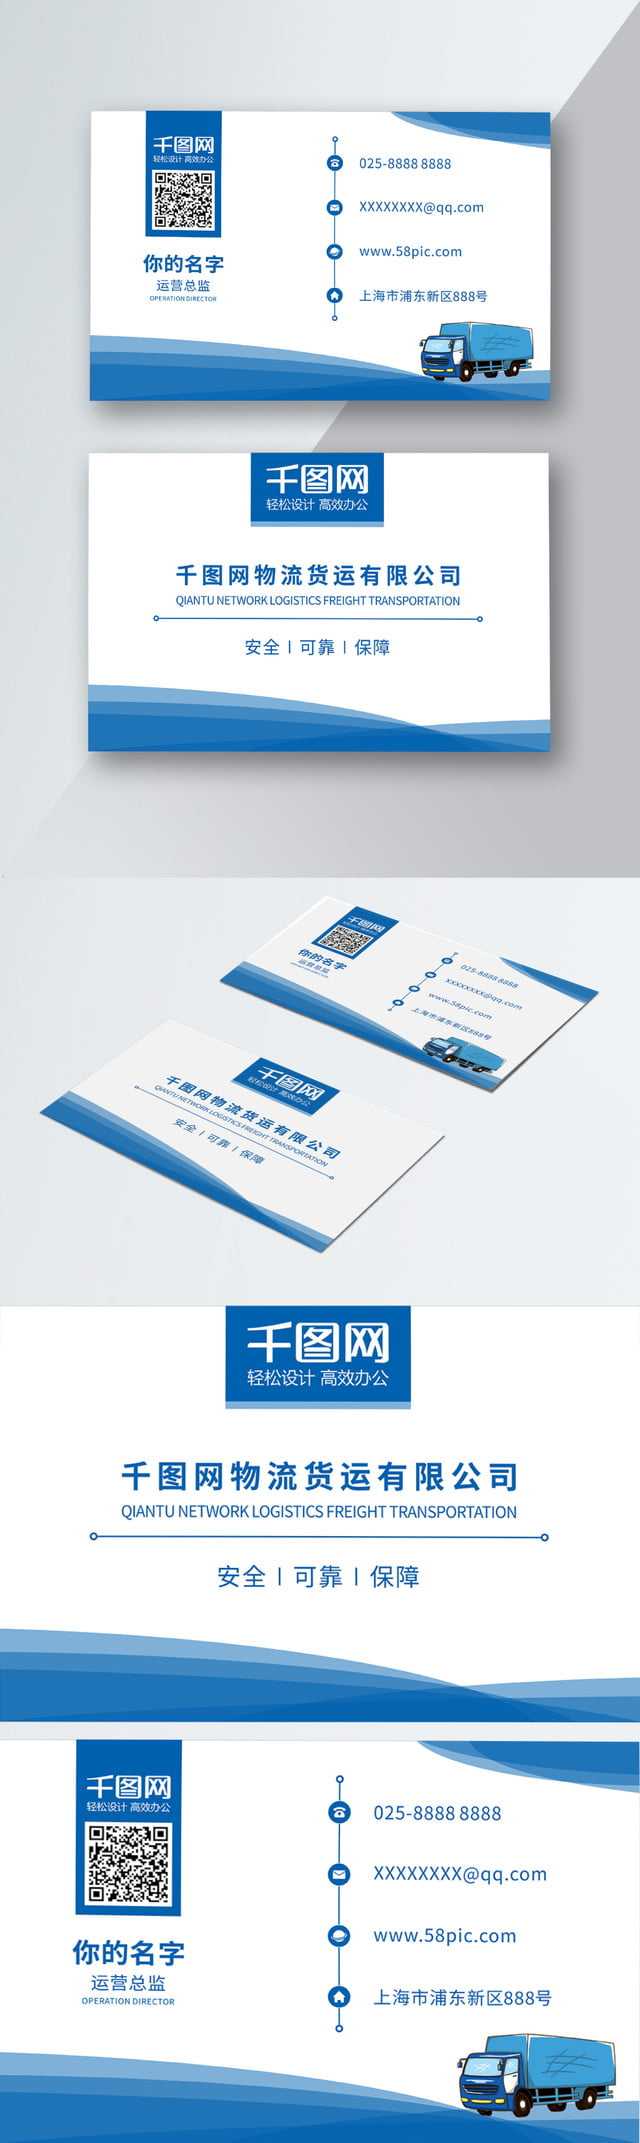 Cargo Company Business Card Material Download Shipping Regarding Transport Business Cards Templates Free